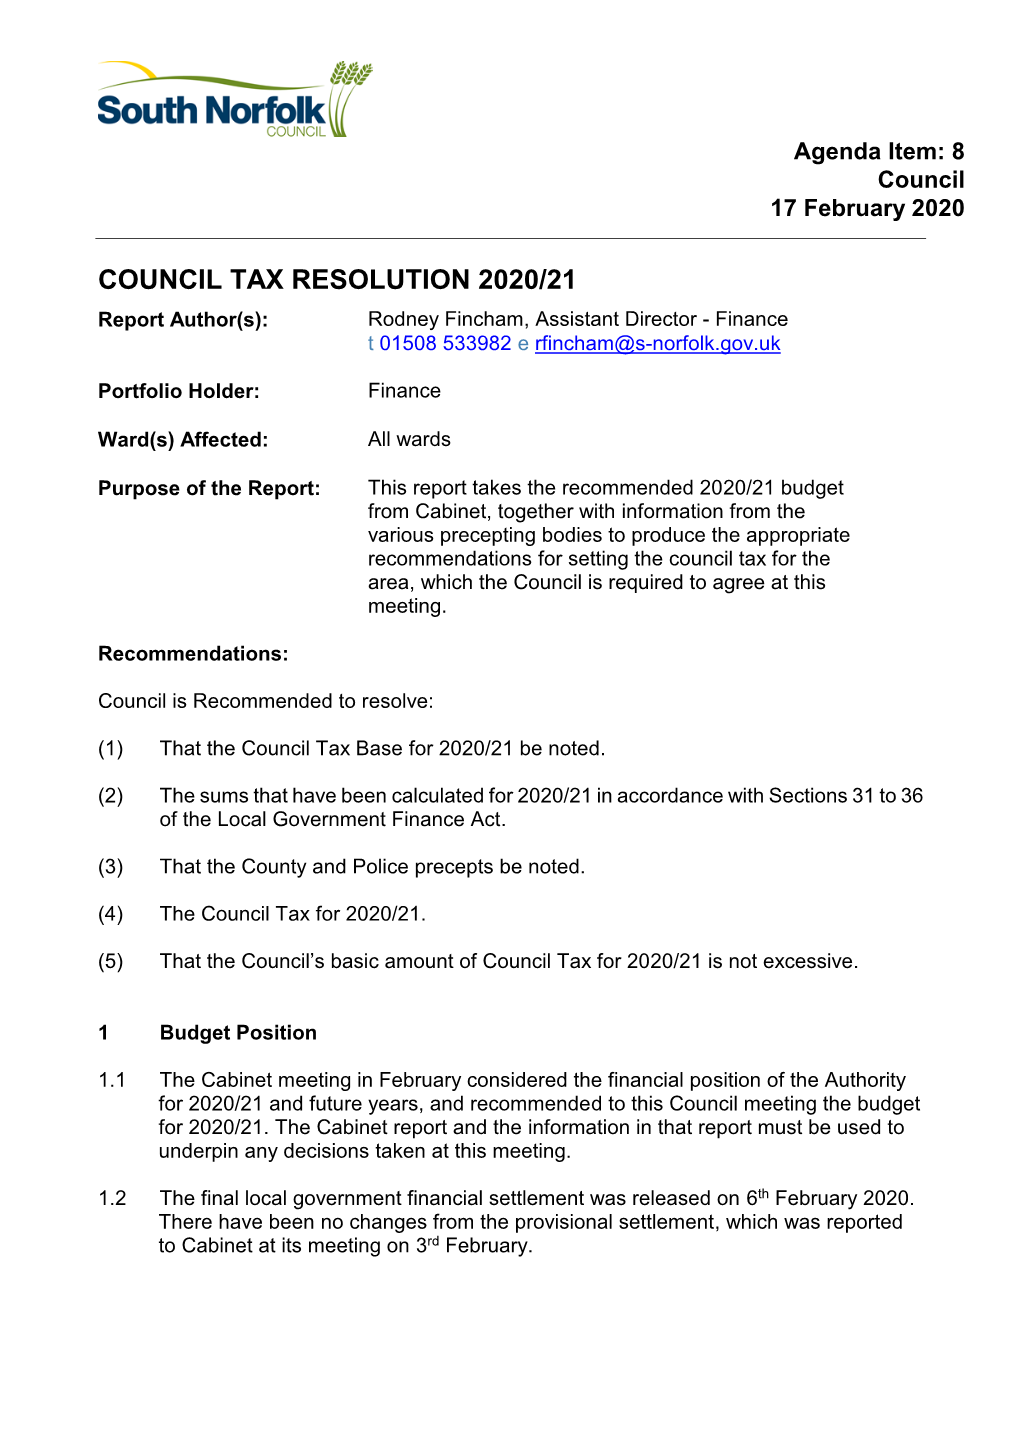 Download: Item 8 Council Tax Resolution File Type